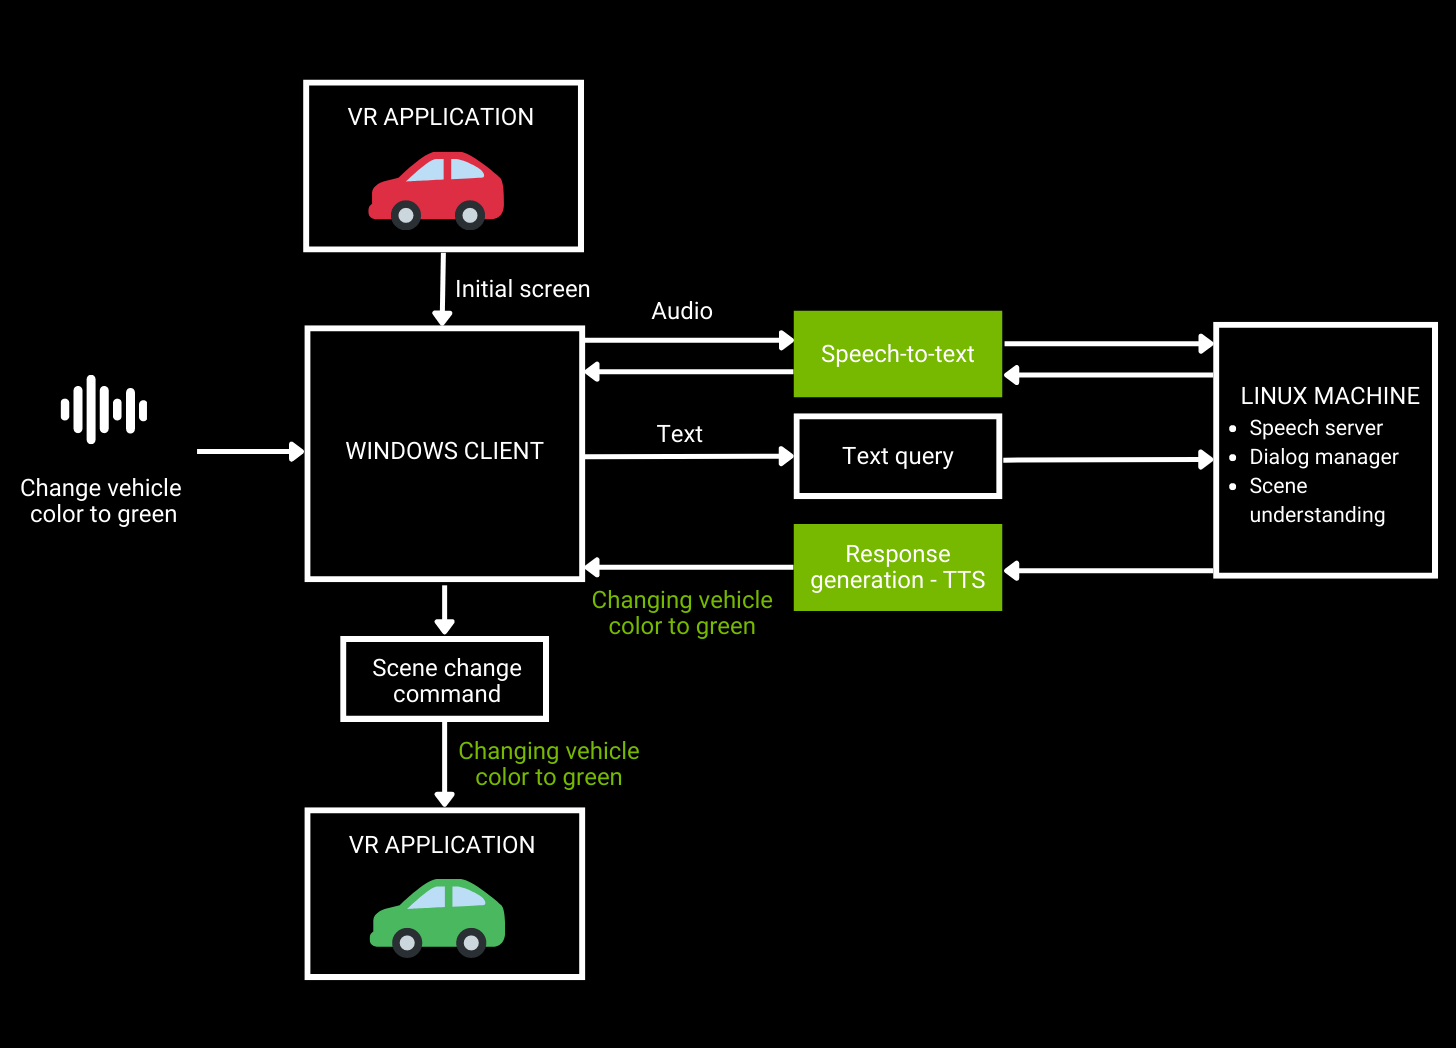 Diagram showing how automatic speech recognition and text-to-speech integrate into the VR car design workflow architecture.